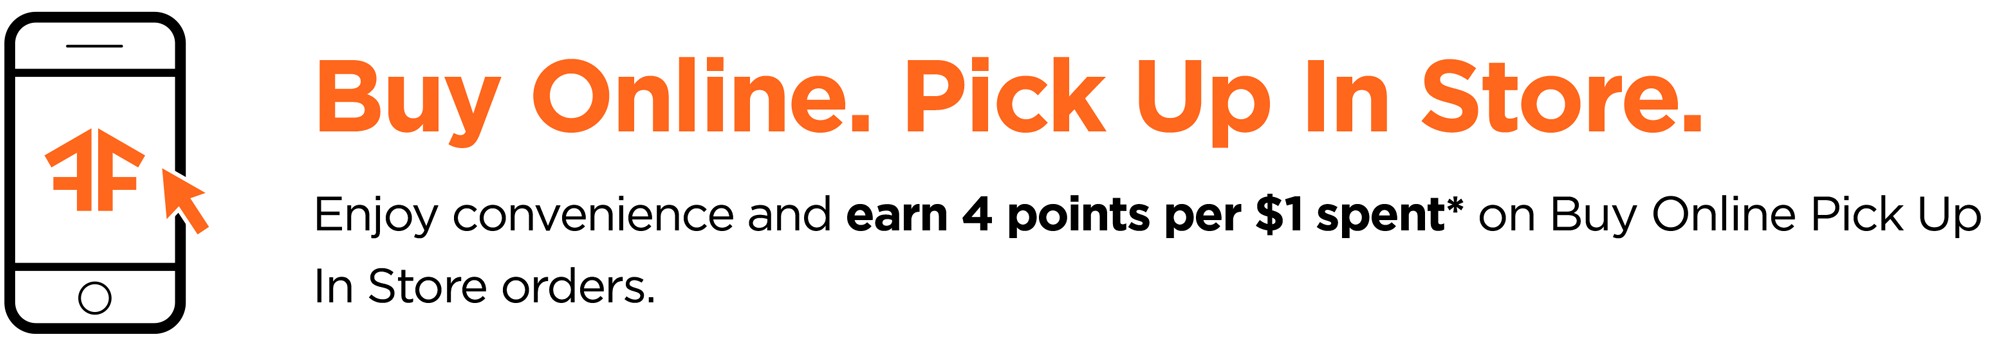 Buy Online. Pick Up In Store. Enjoy convenience and earn 4 points per $1 spent* on Buy Online Pick Up In Store orders.